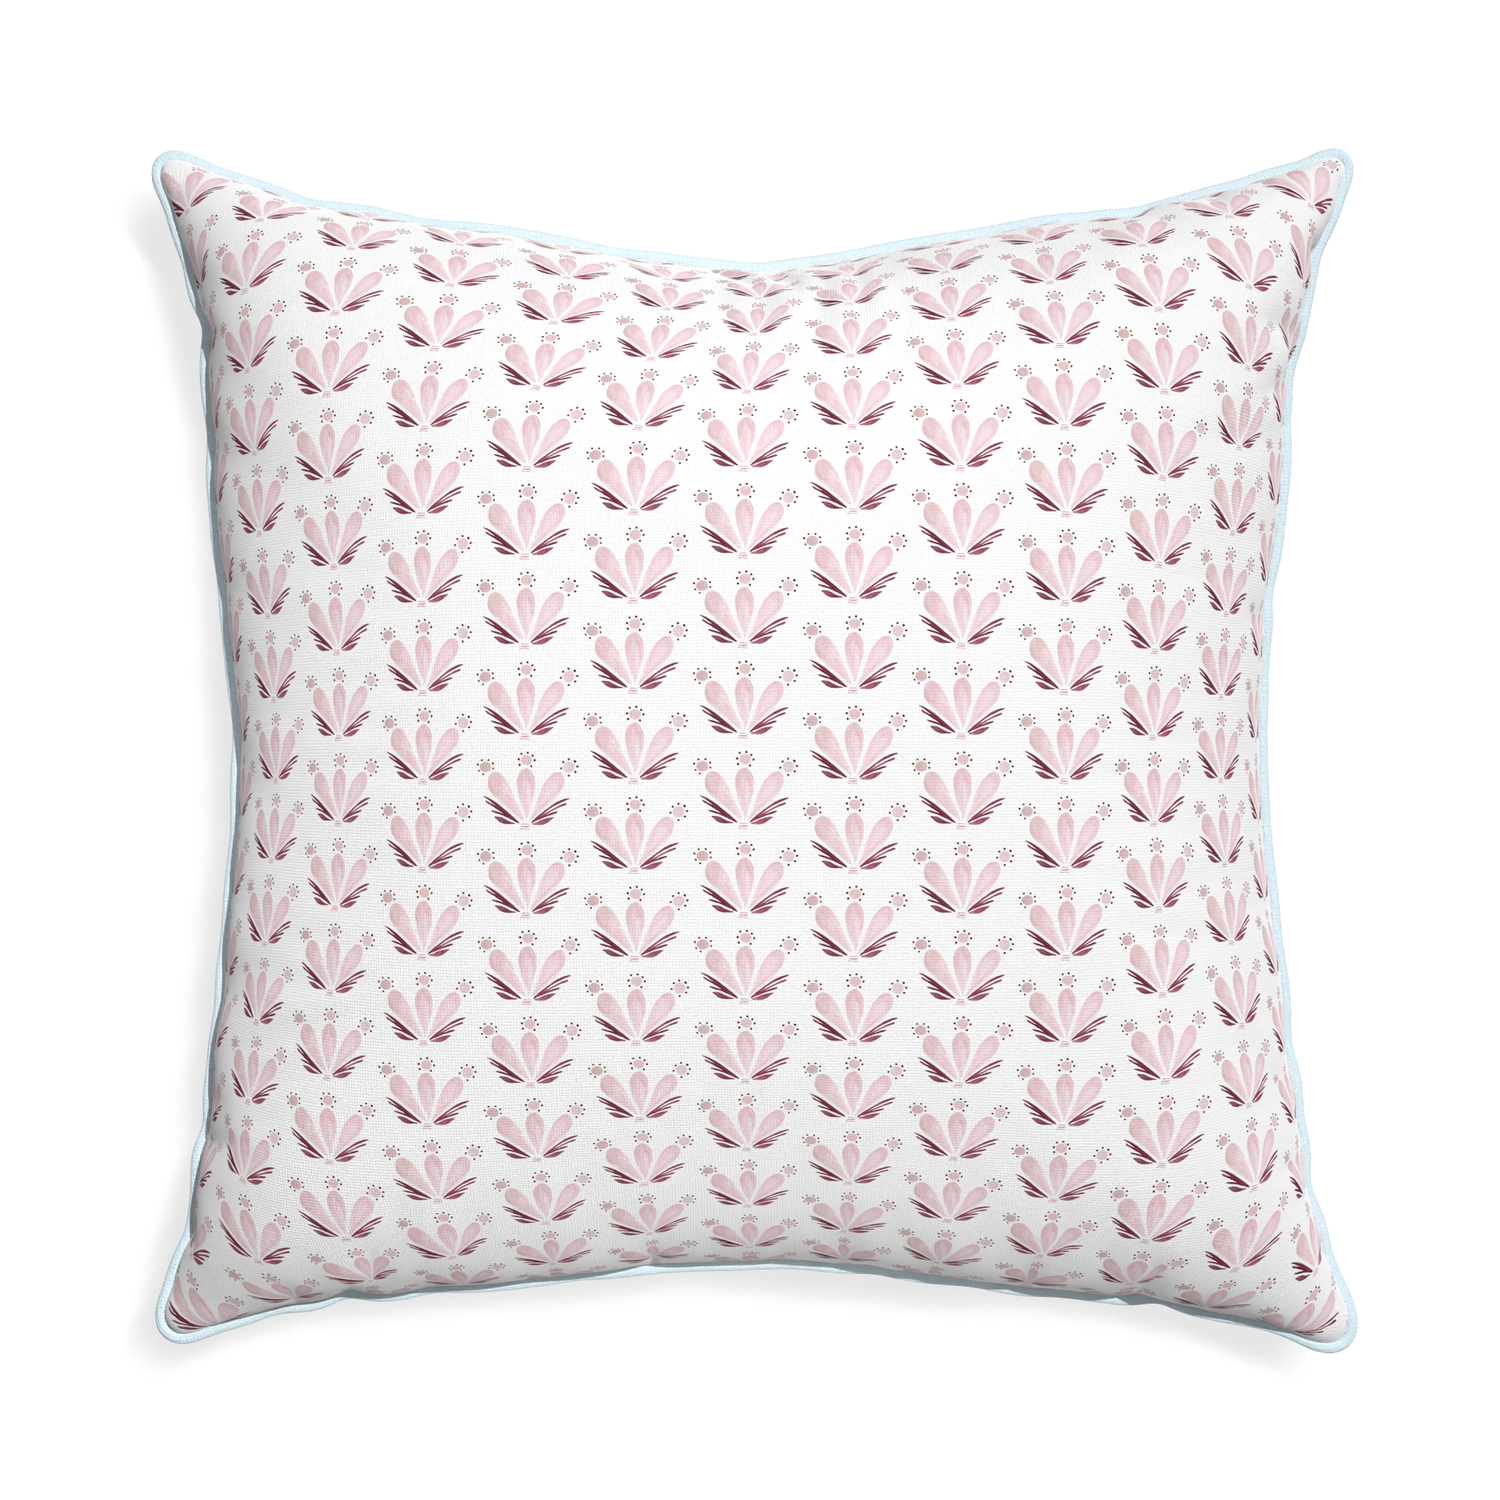 Euro-sham serena pink custom pillow with powder piping on white background